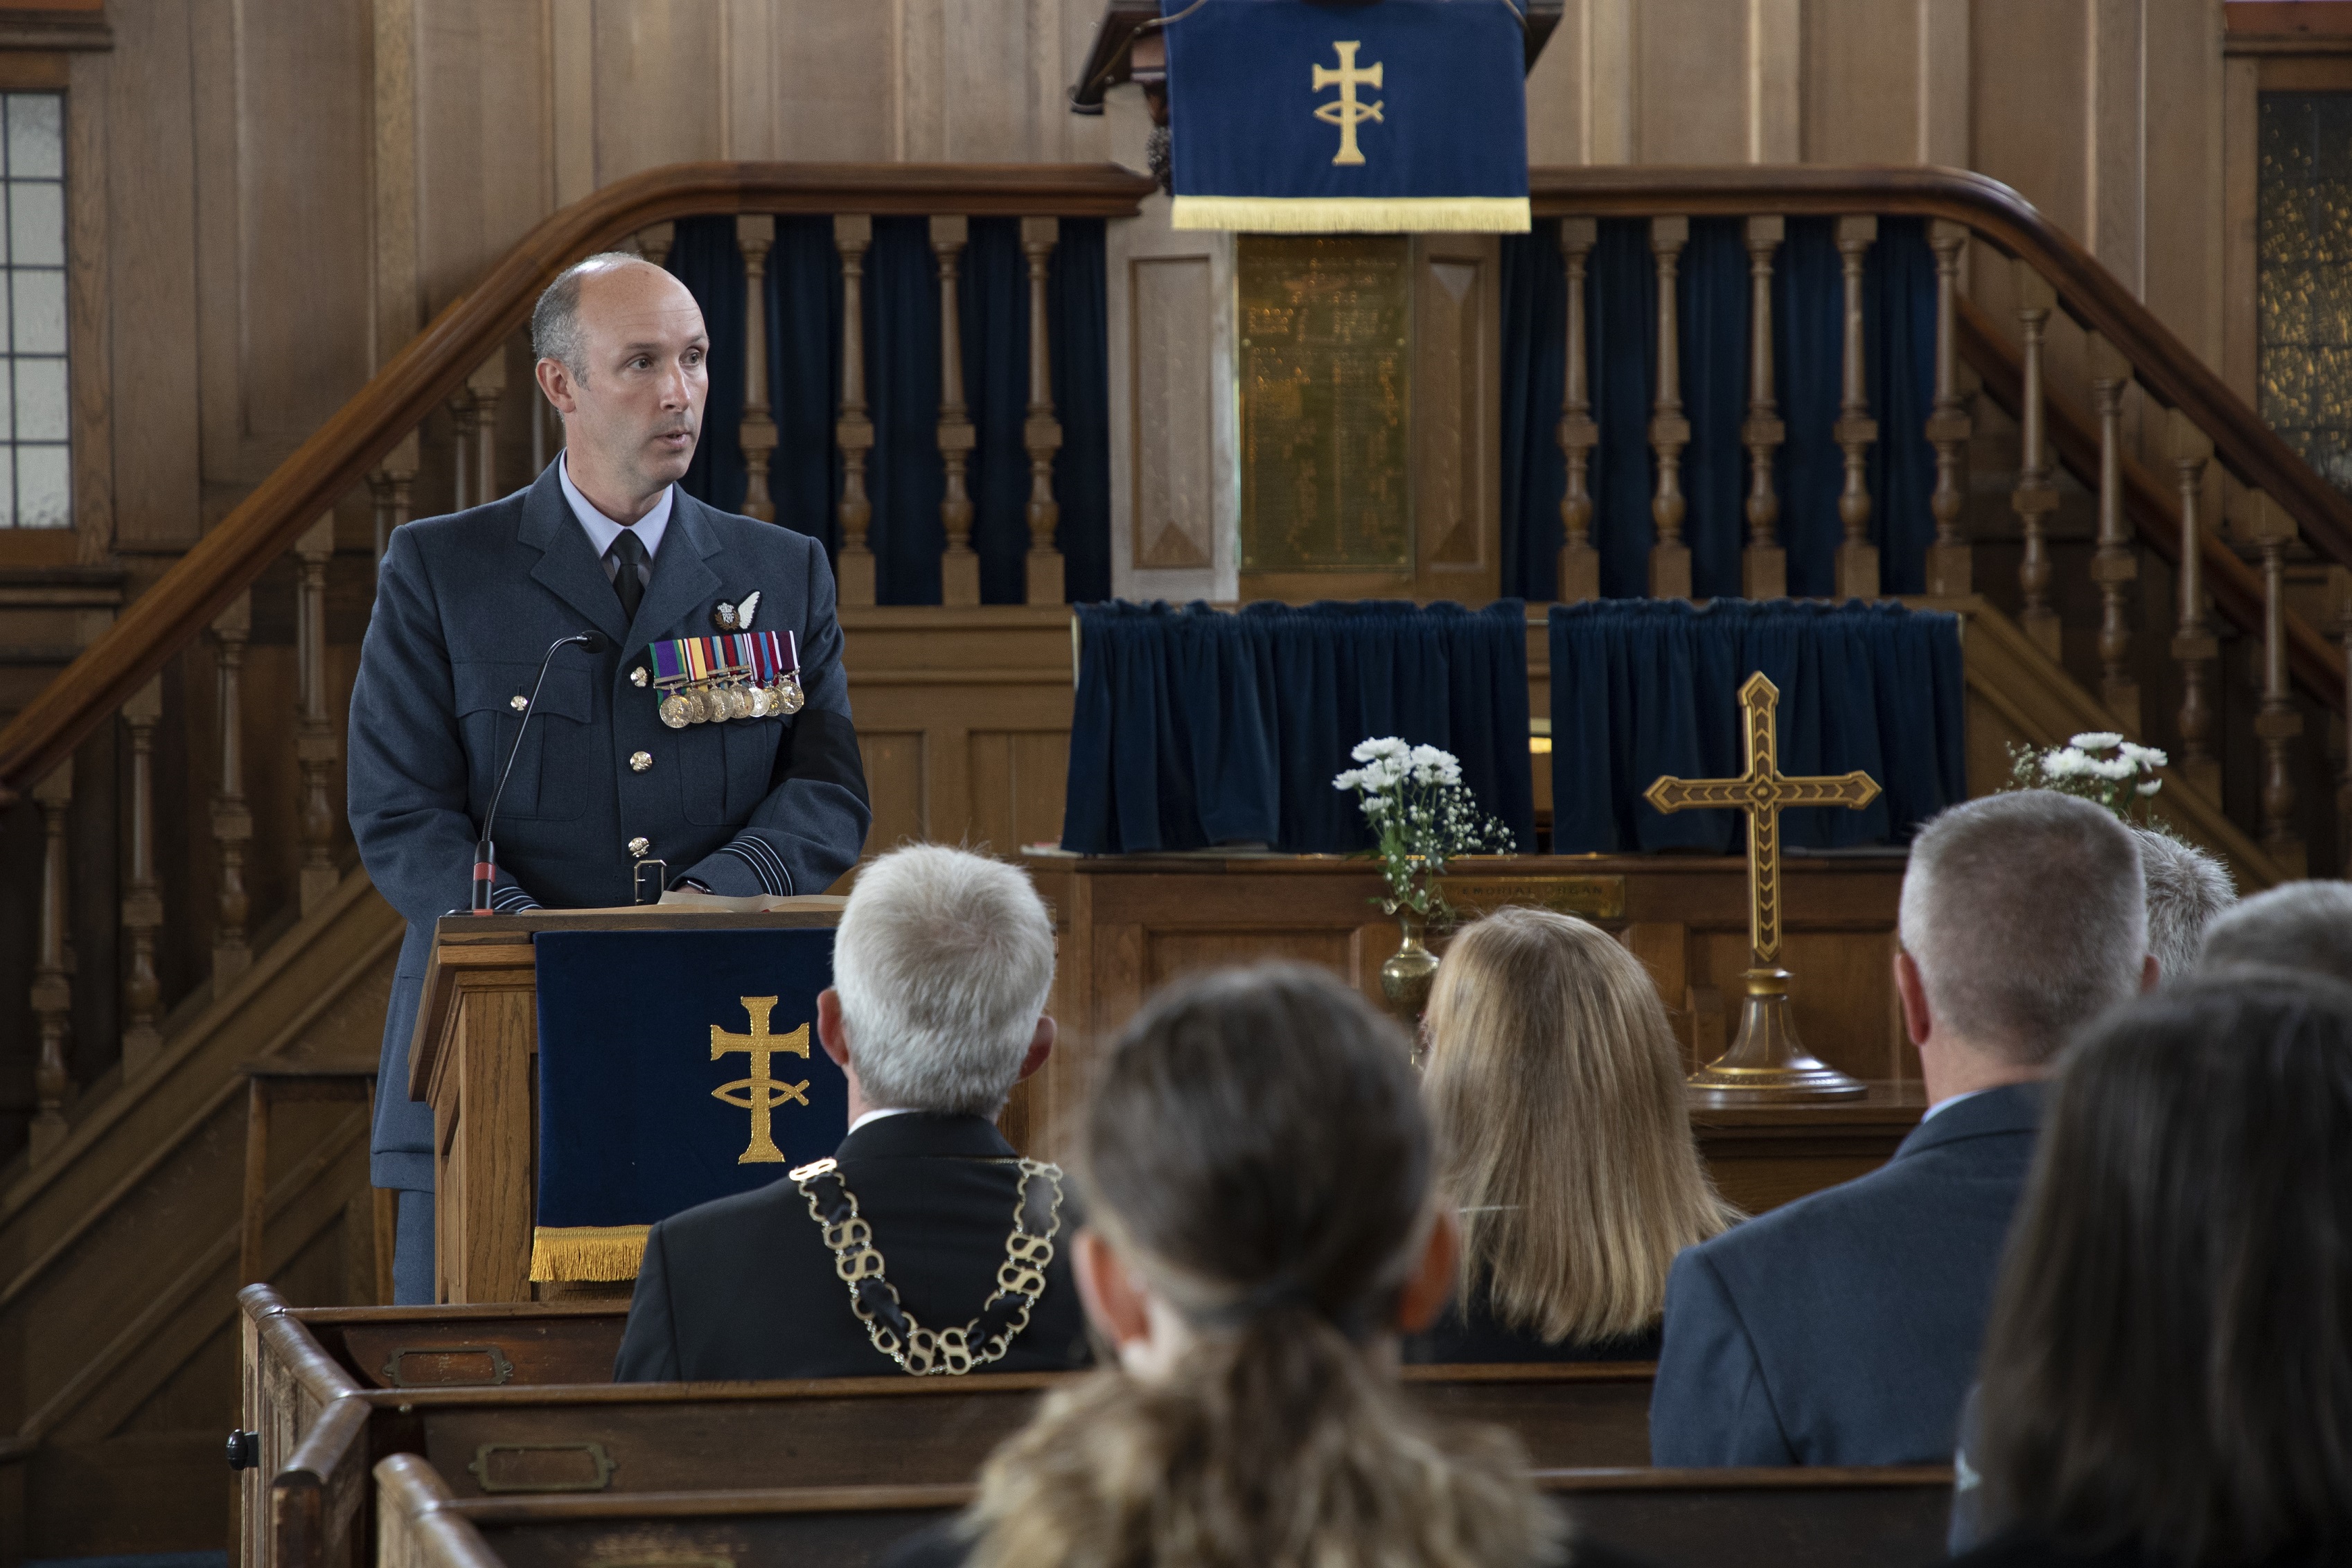 A reading is given by Wing Commander Jez Case, Station Commander at RAF Wittering